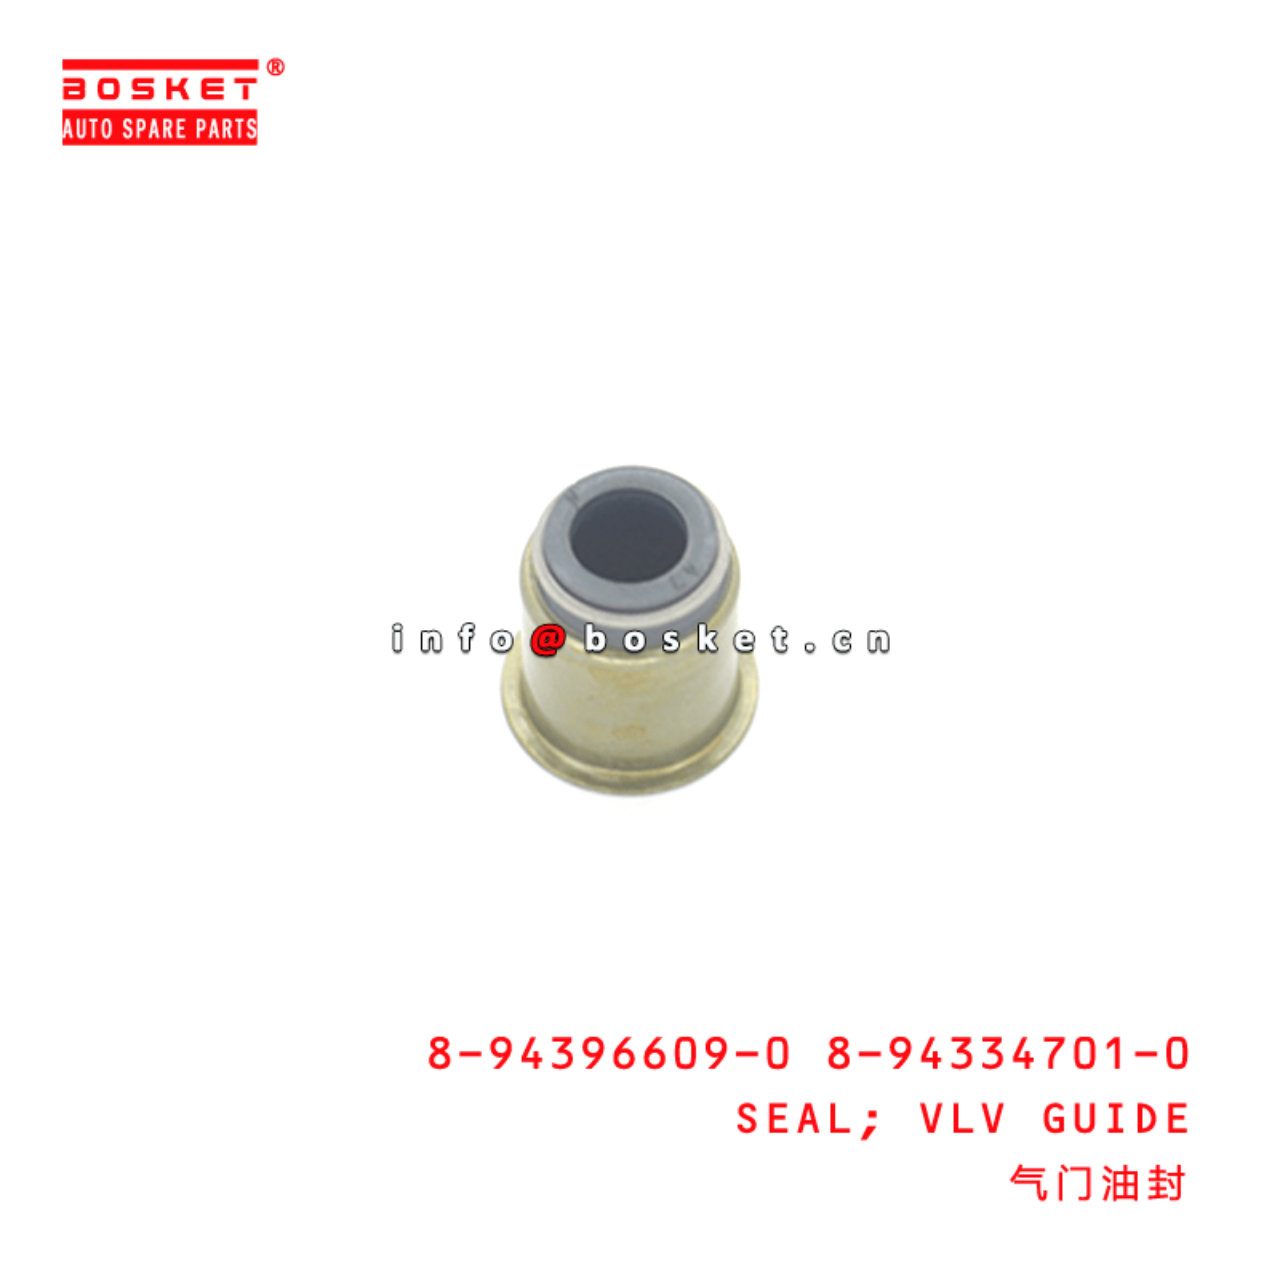 8-94396609-0 8-94334701-0 Valve Guide Seal 8943966090 8943347010 Suitable for ISUZU FSR32 6HE1T